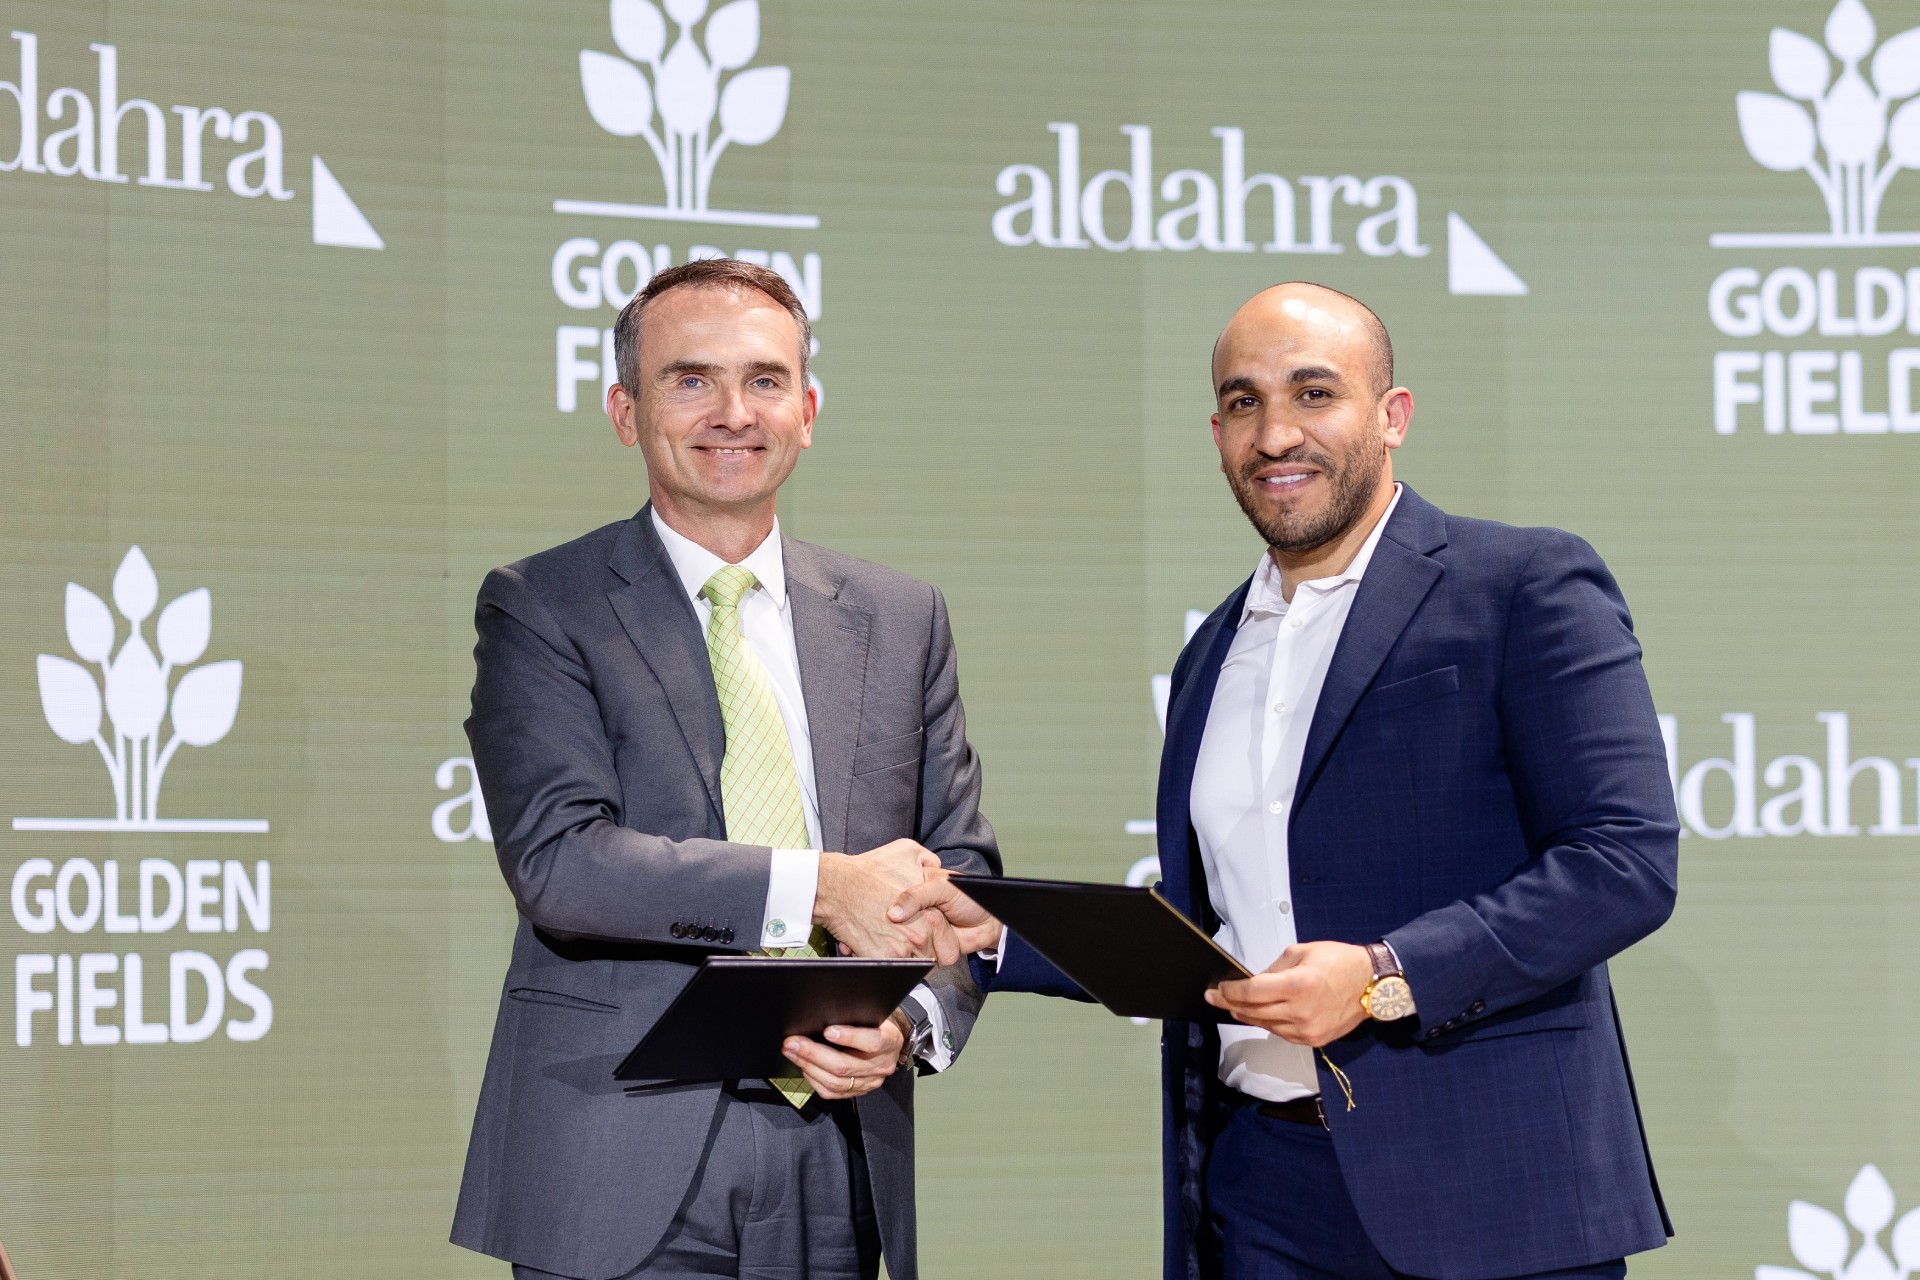 Al Dahra signs strategic partnership and supply agreement with Golden Fields to expand its global sourcing footprint in Baltics